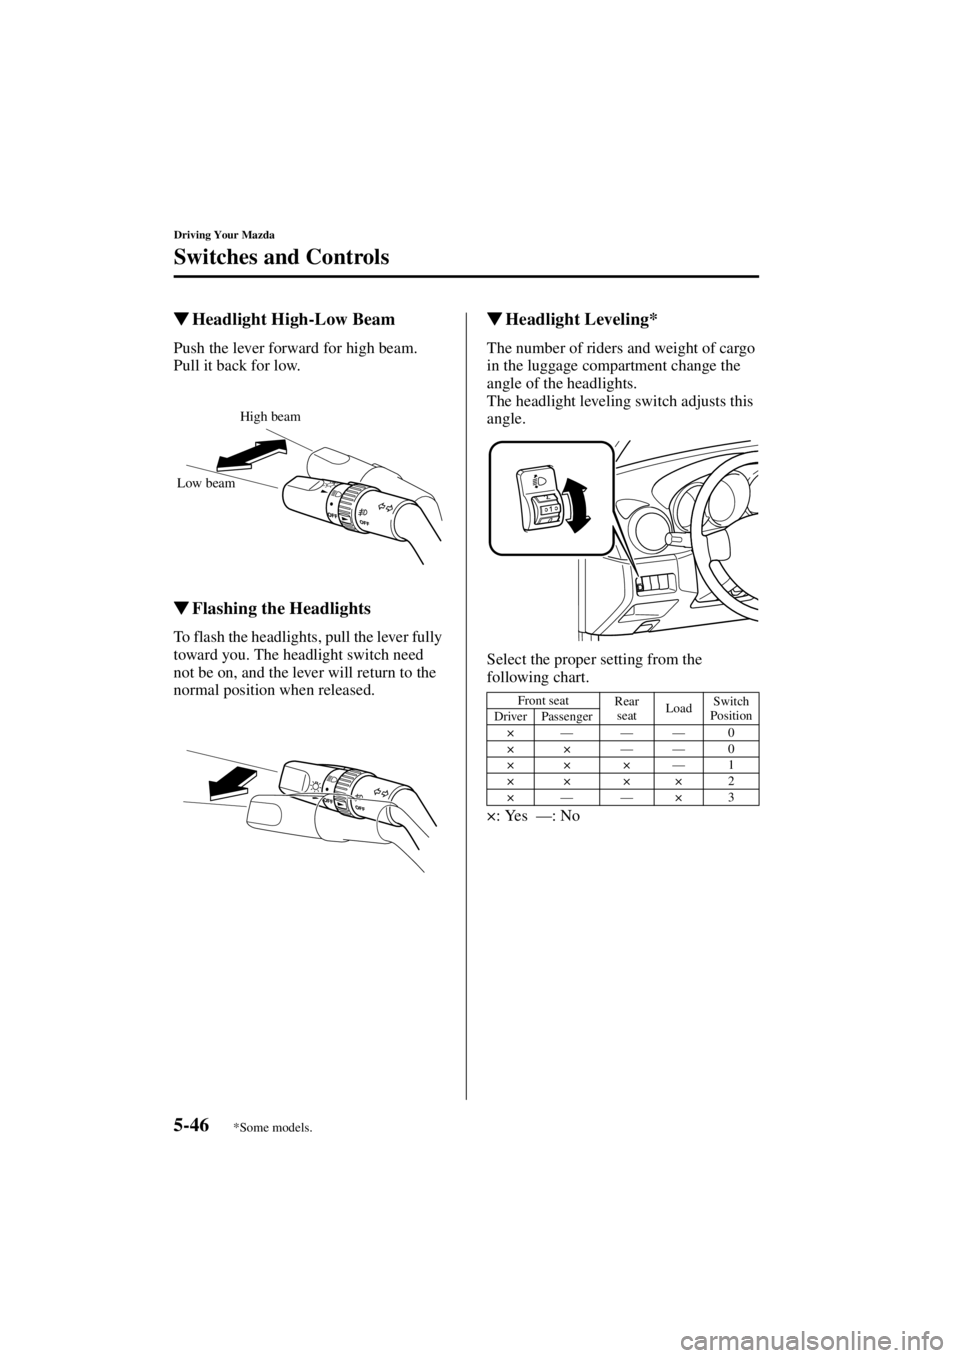 MAZDA MODEL 3 4-DOOR 2004  Owners Manual 5-46
Driving Your Mazda
Switches and Controls
Form No. 8S18-EA-03I
Headlight High-Low Beam
Push the lever forward for high beam.
Pull it back for low.
Flashing the Headlights
To flash the headlights